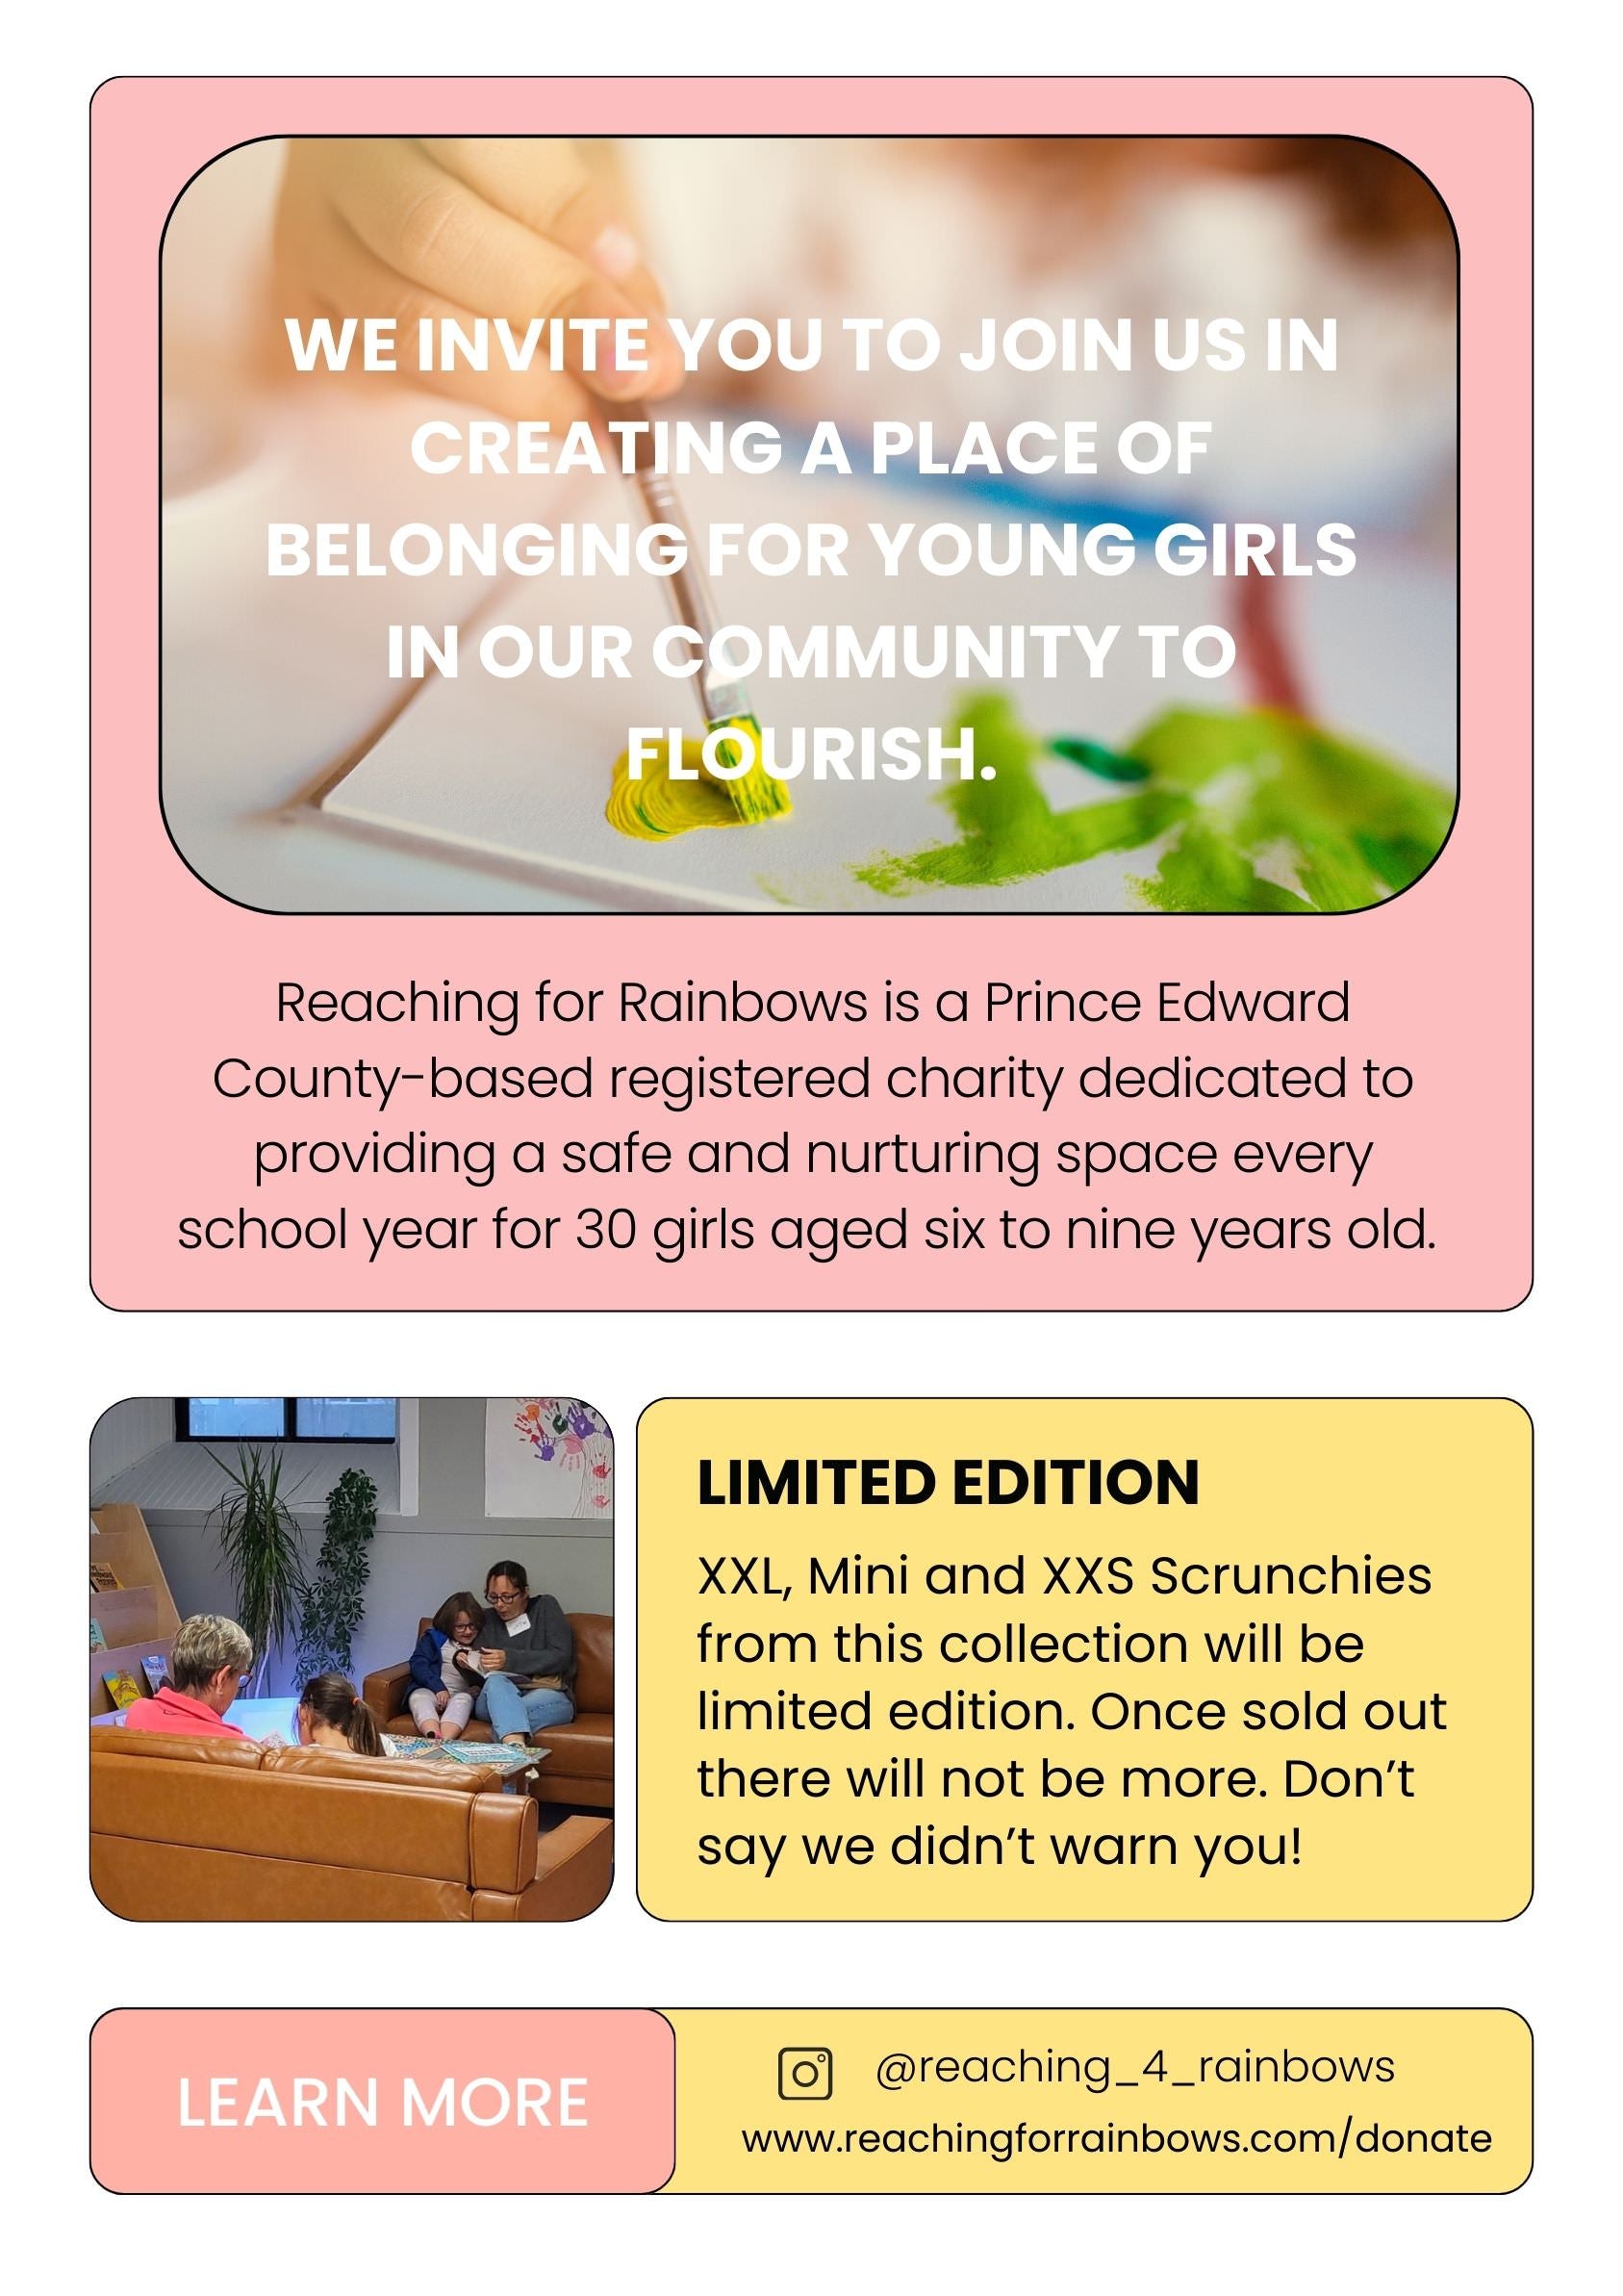 Limited edition Spring Drop Reaching For Rainbows Picton Ontario Charity Collaboration with XXL Scrunchie to donate 20% proceeds Picton Ontario Prince Edward County Small Business Owner